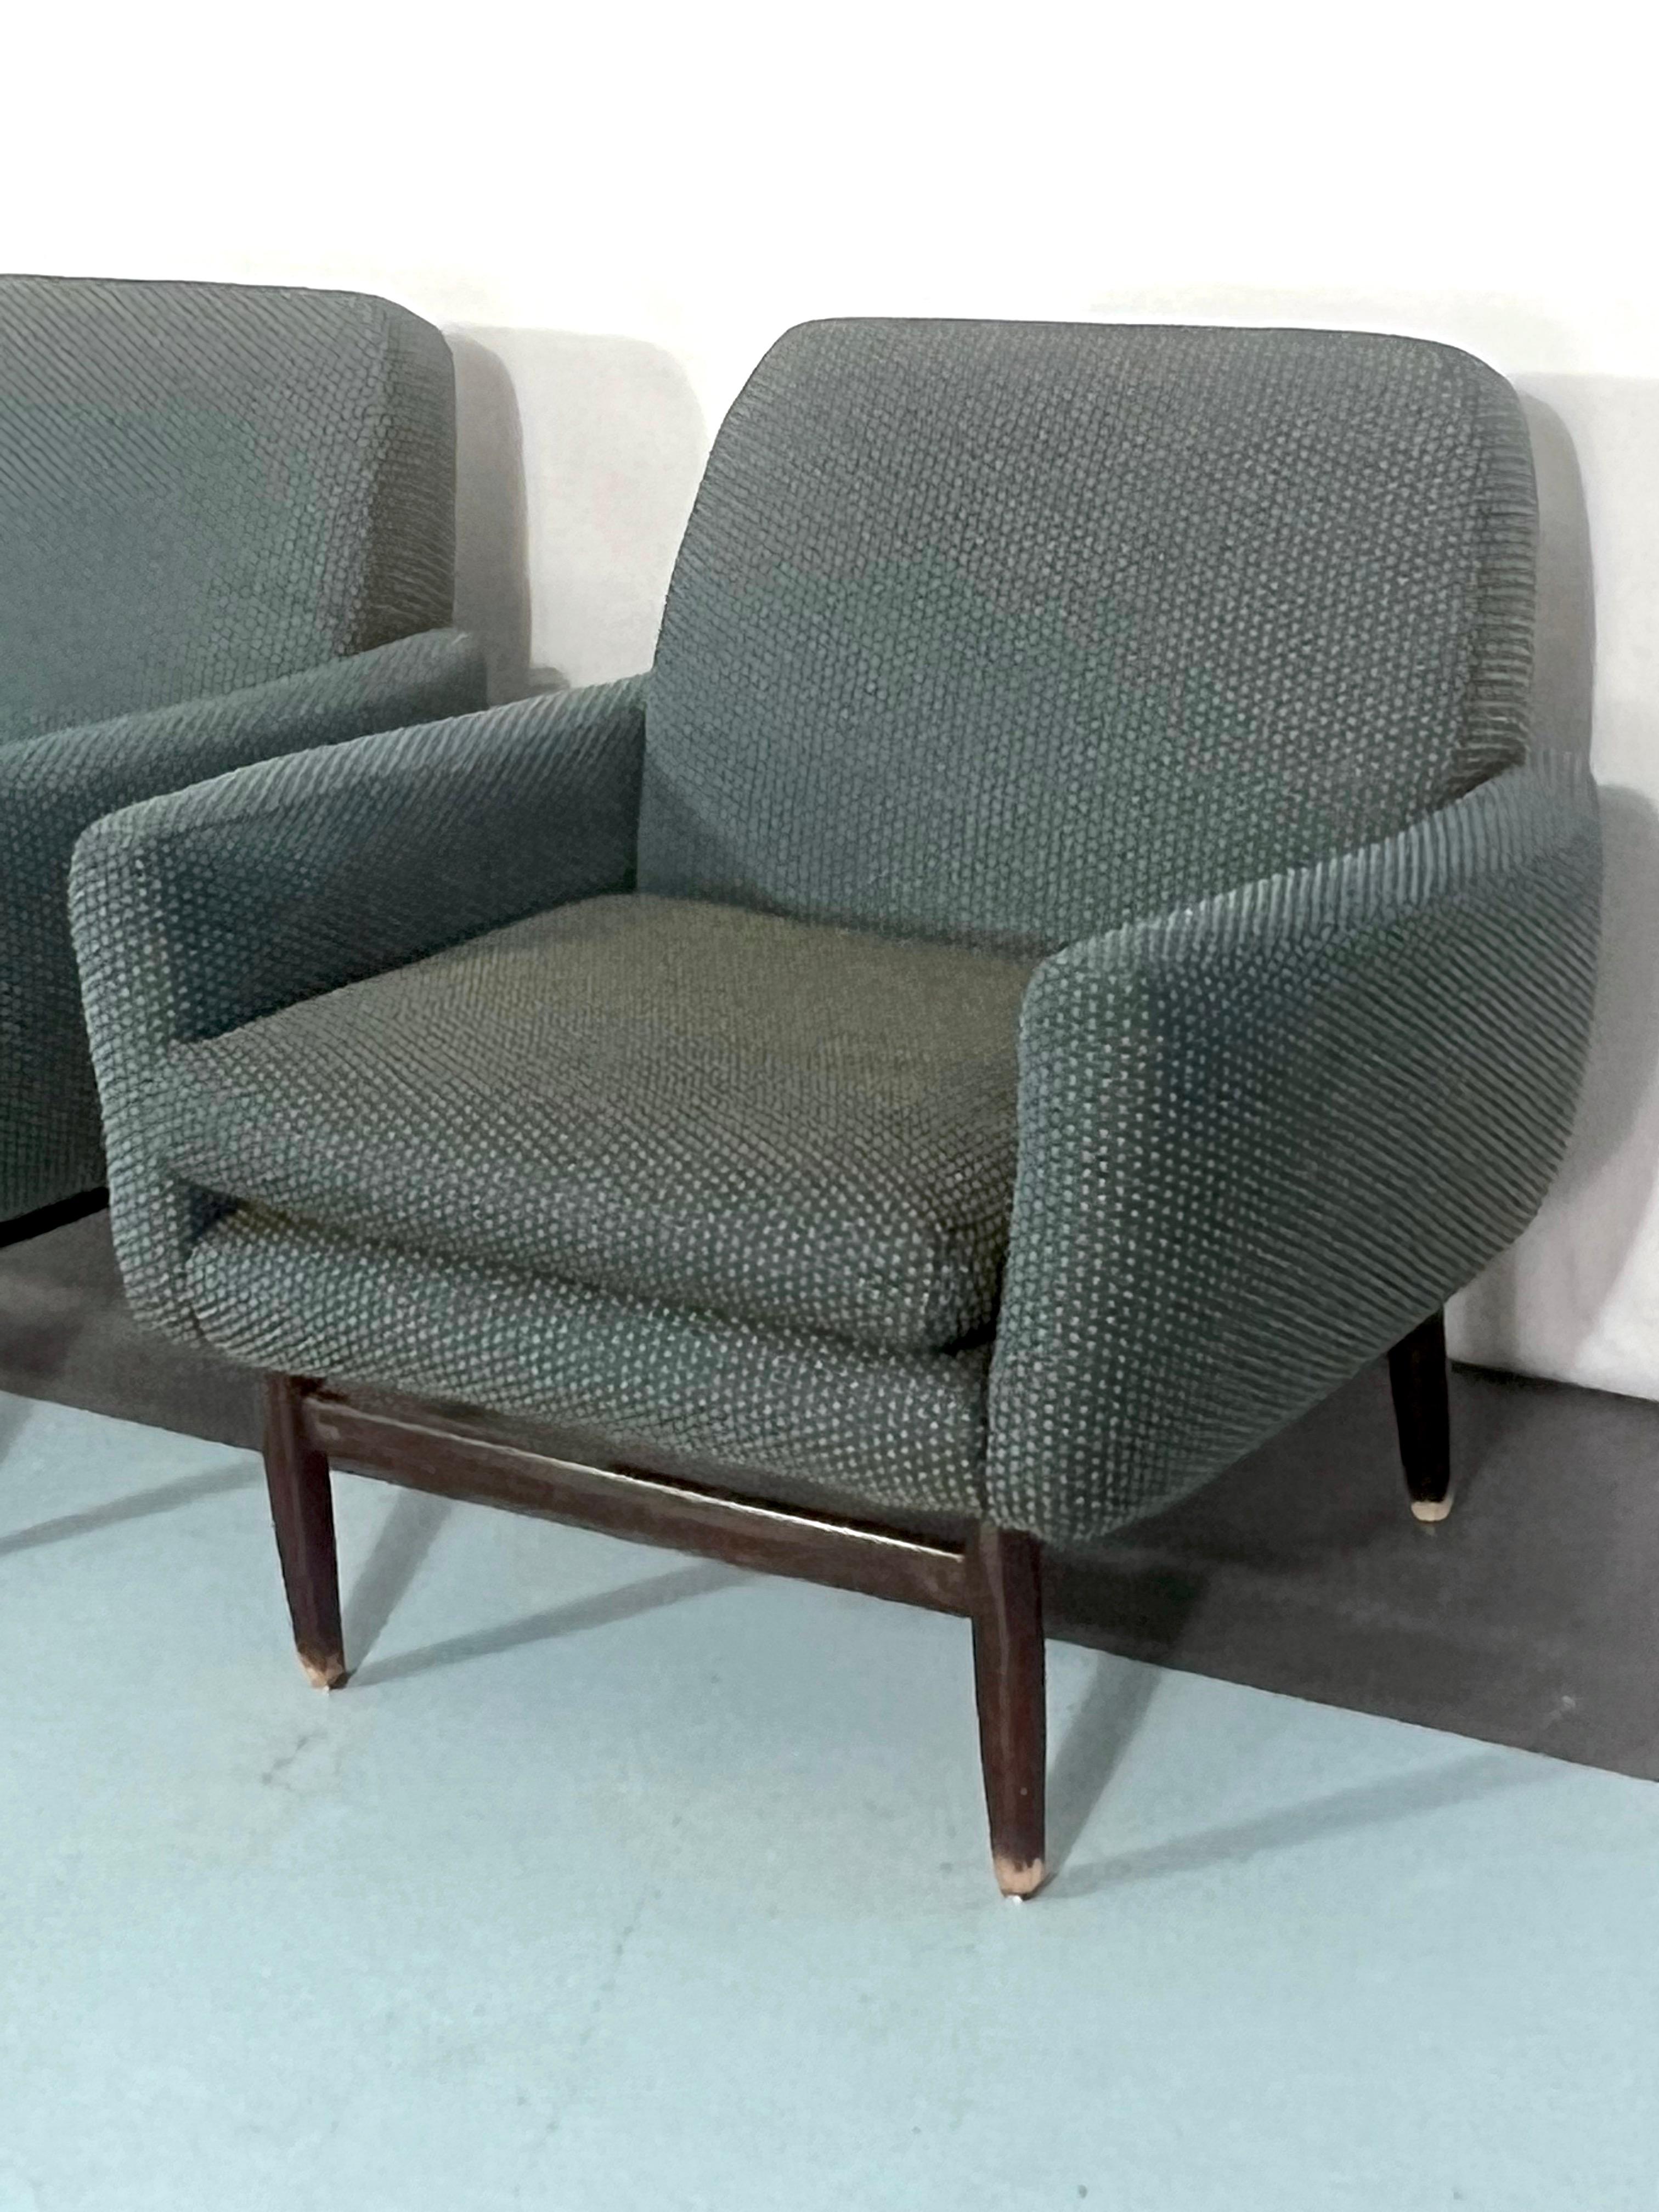 Italian Mid-century wood modern armchairs from 60s In Good Condition For Sale In Catania, CT